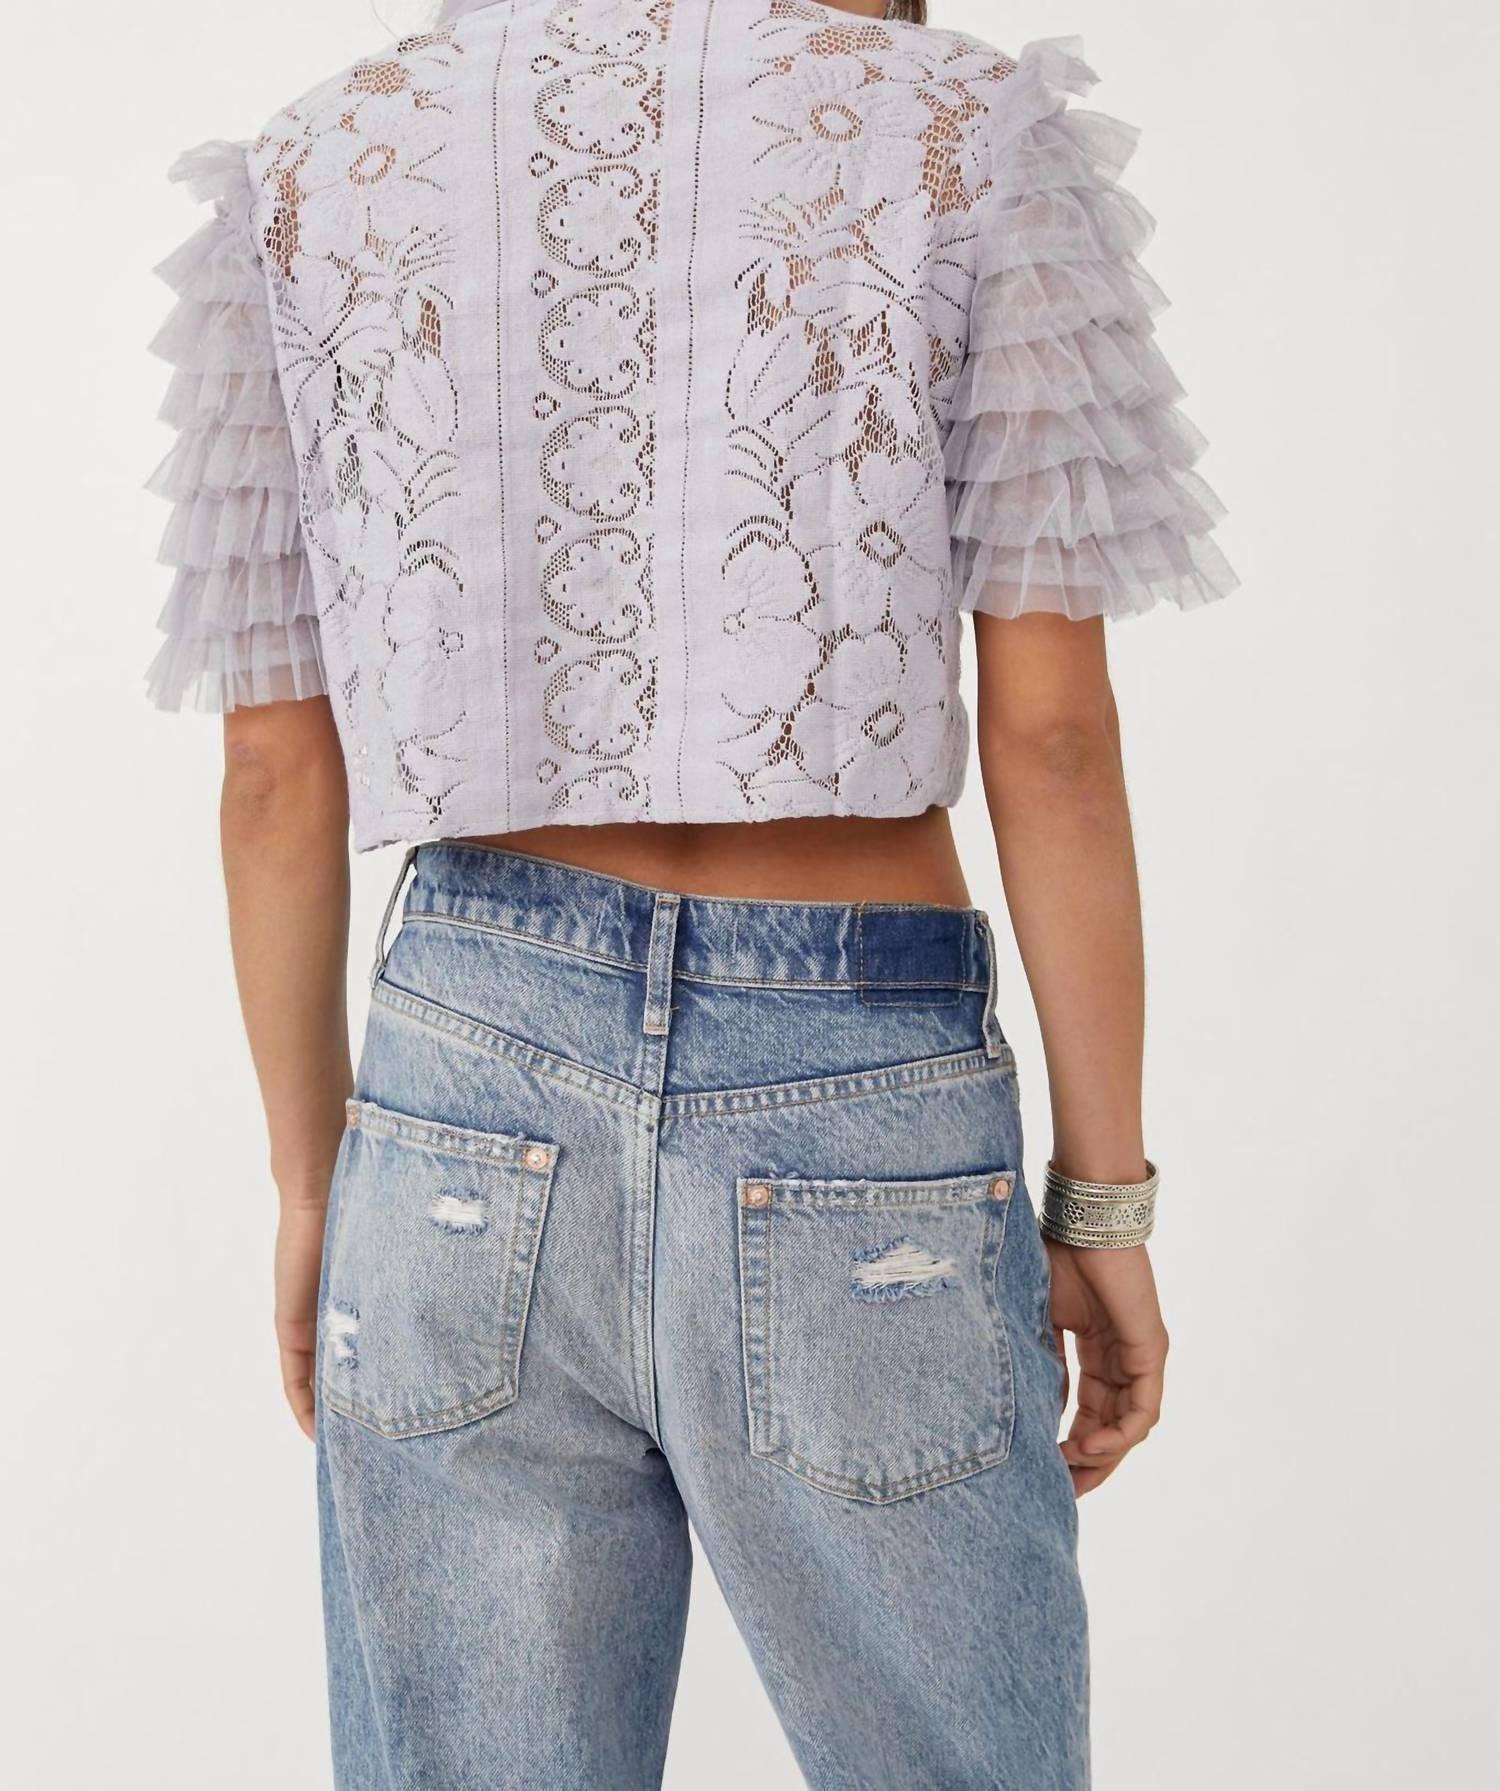 Free People Lace Madonna Top in Heather (Blue) | Lyst